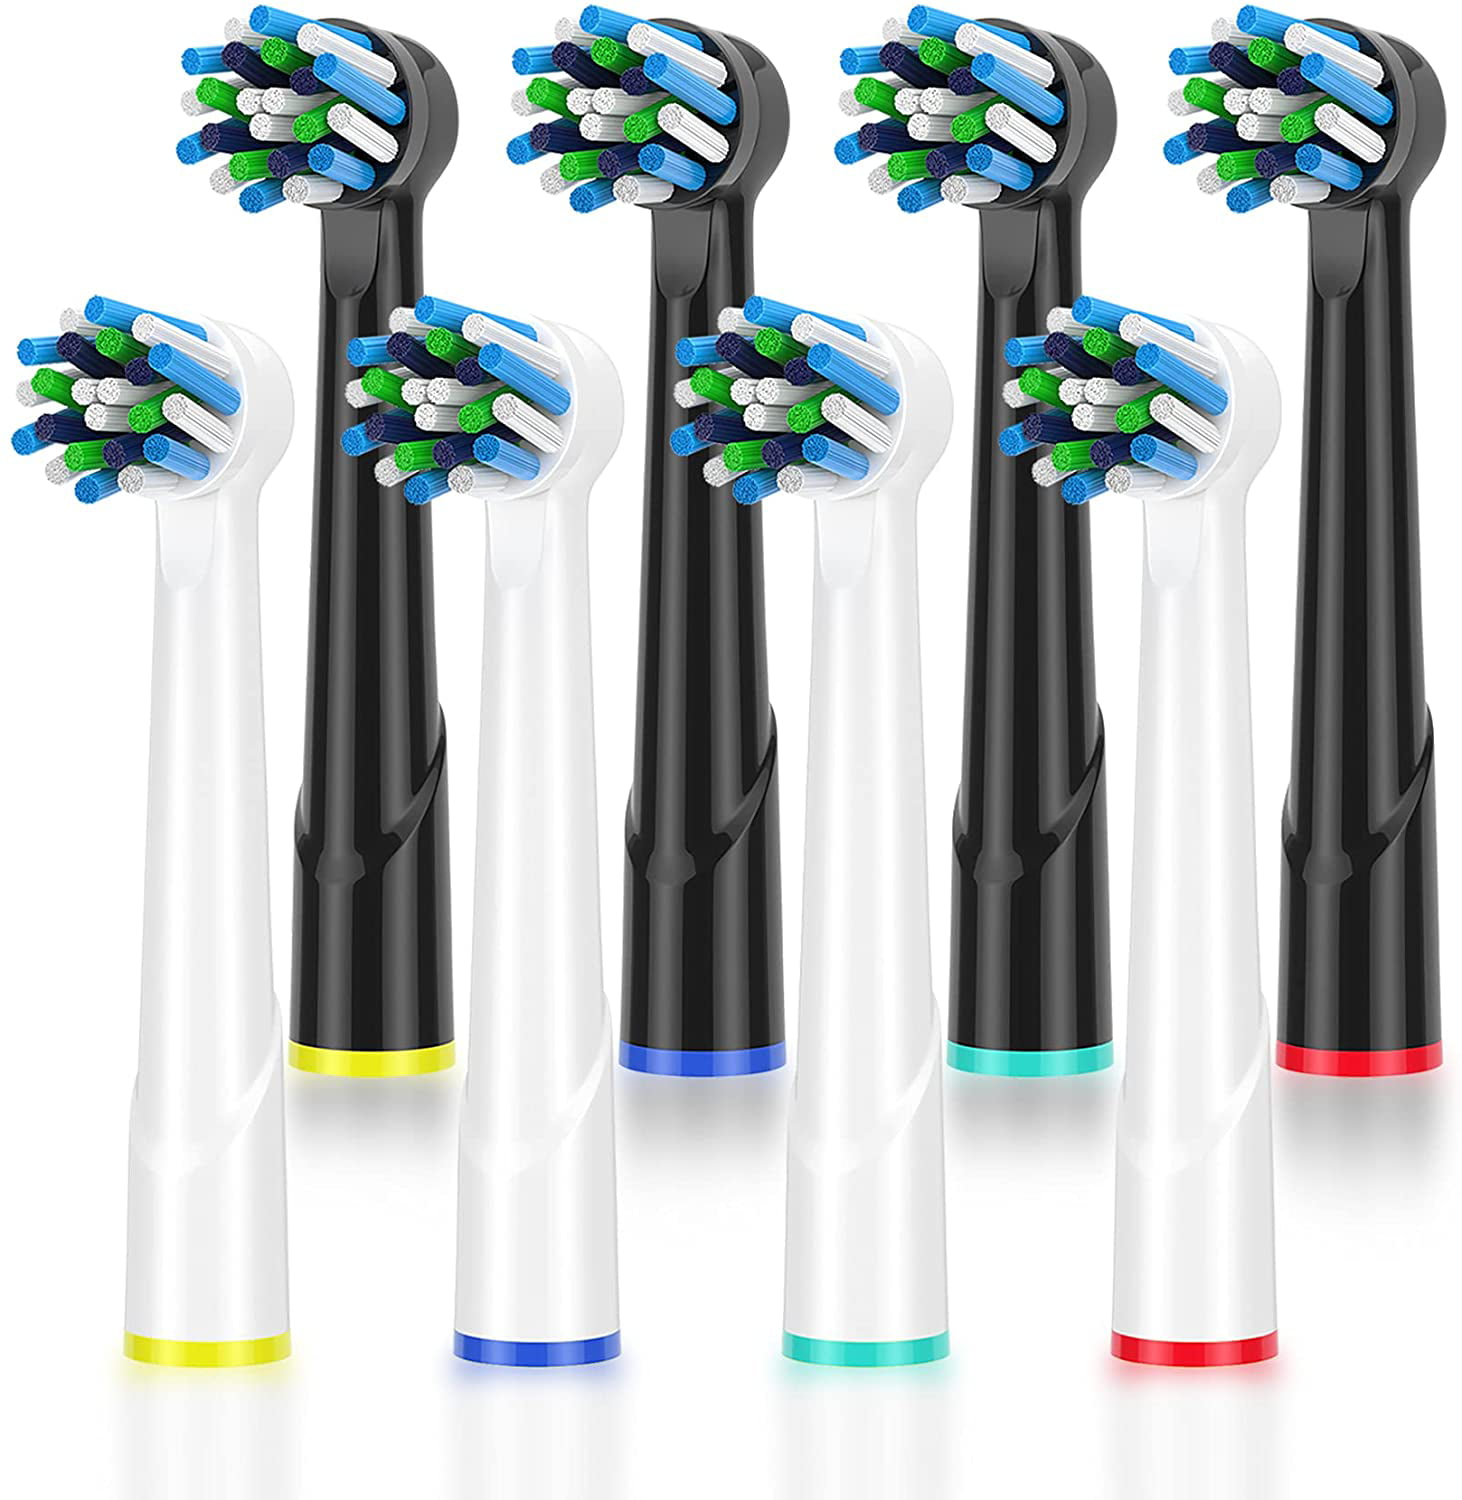 Oral b Replacement Heads Compatible with Oral b Braun Electric Toothbrush,8 Pack Toothbrush Heads for Pro/500/1000/1500/7500,Vitality, Genuis,Smart -4 White & 4 Black